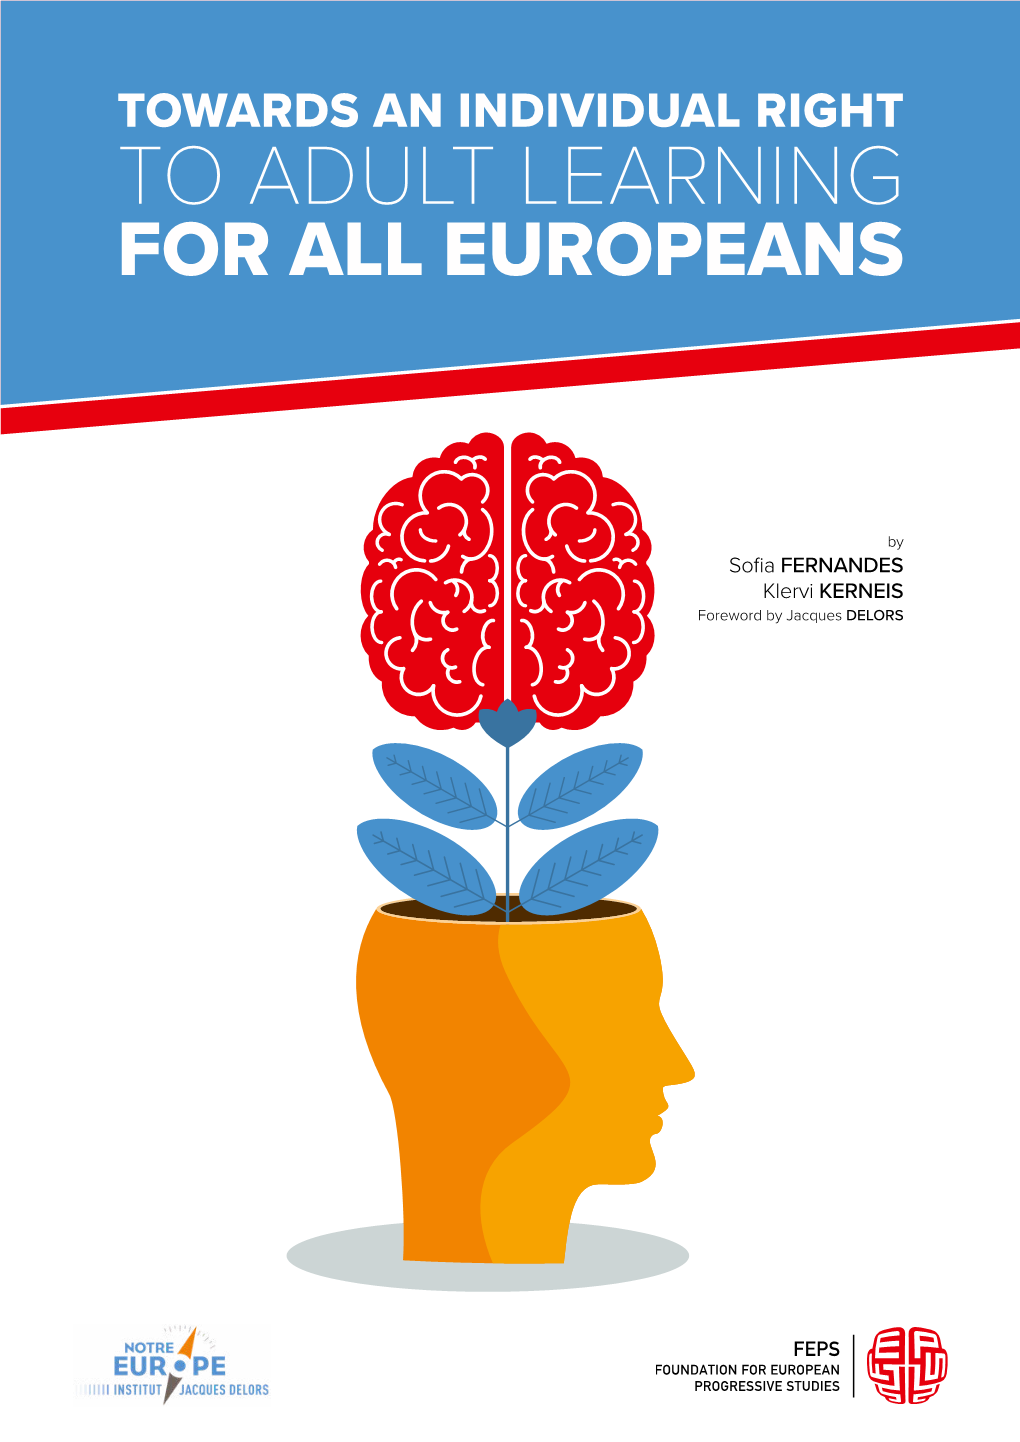 To Adult Learning for All Europeans